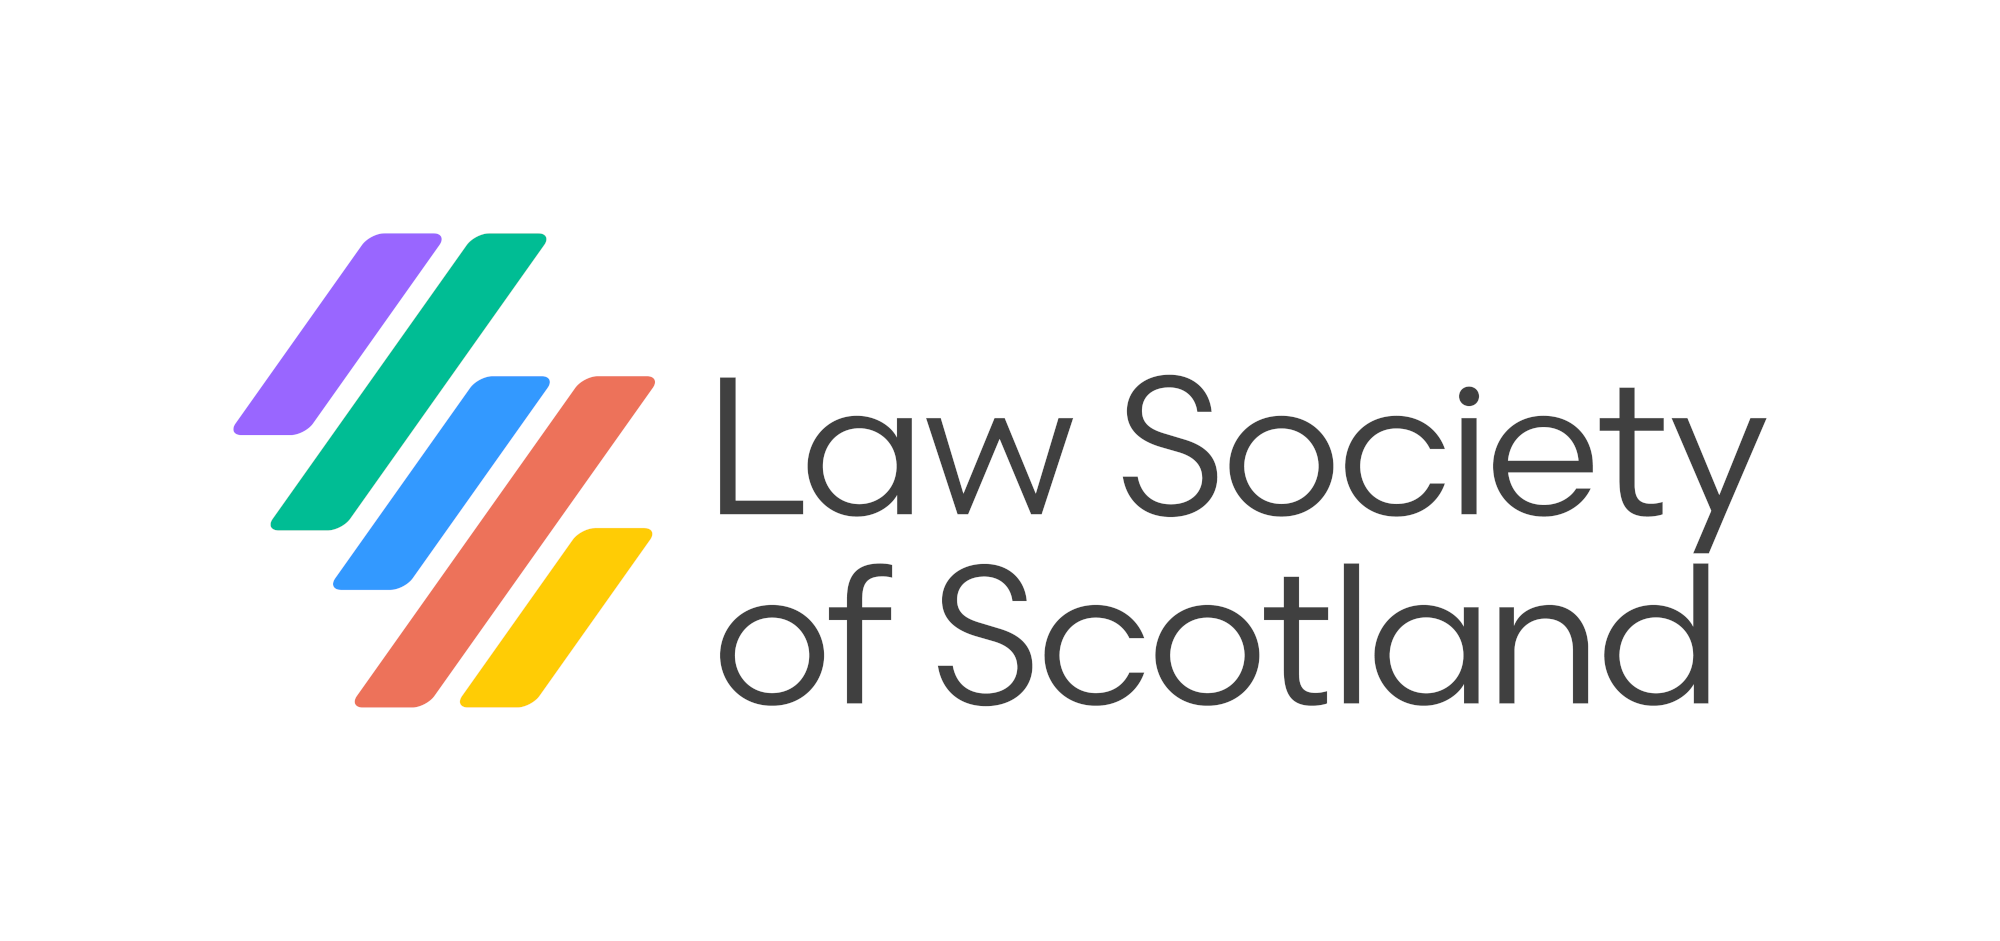 Law Society: Proposed conversion practices legislation ‘too broad’